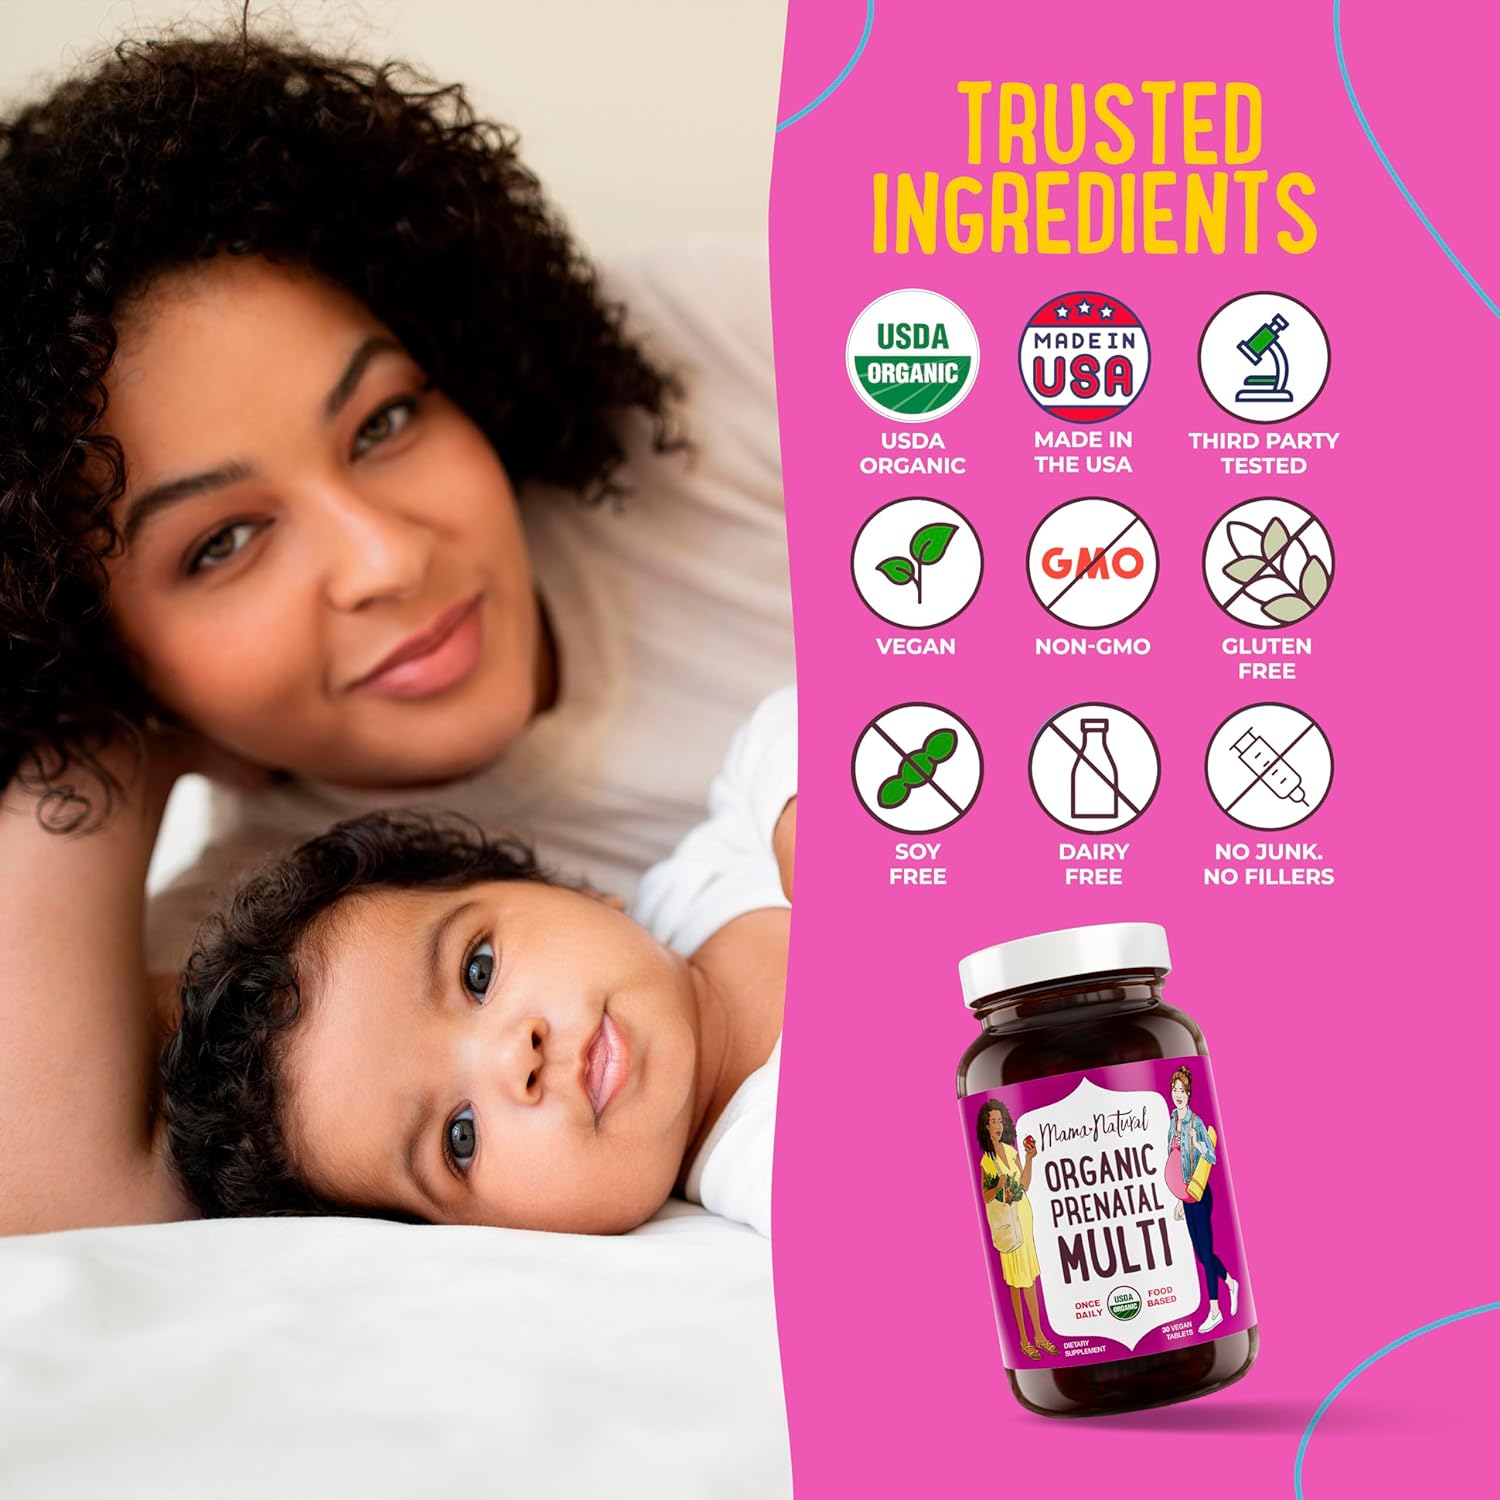 Prenatal Multivitamin by Mama Natural trusted ingredients